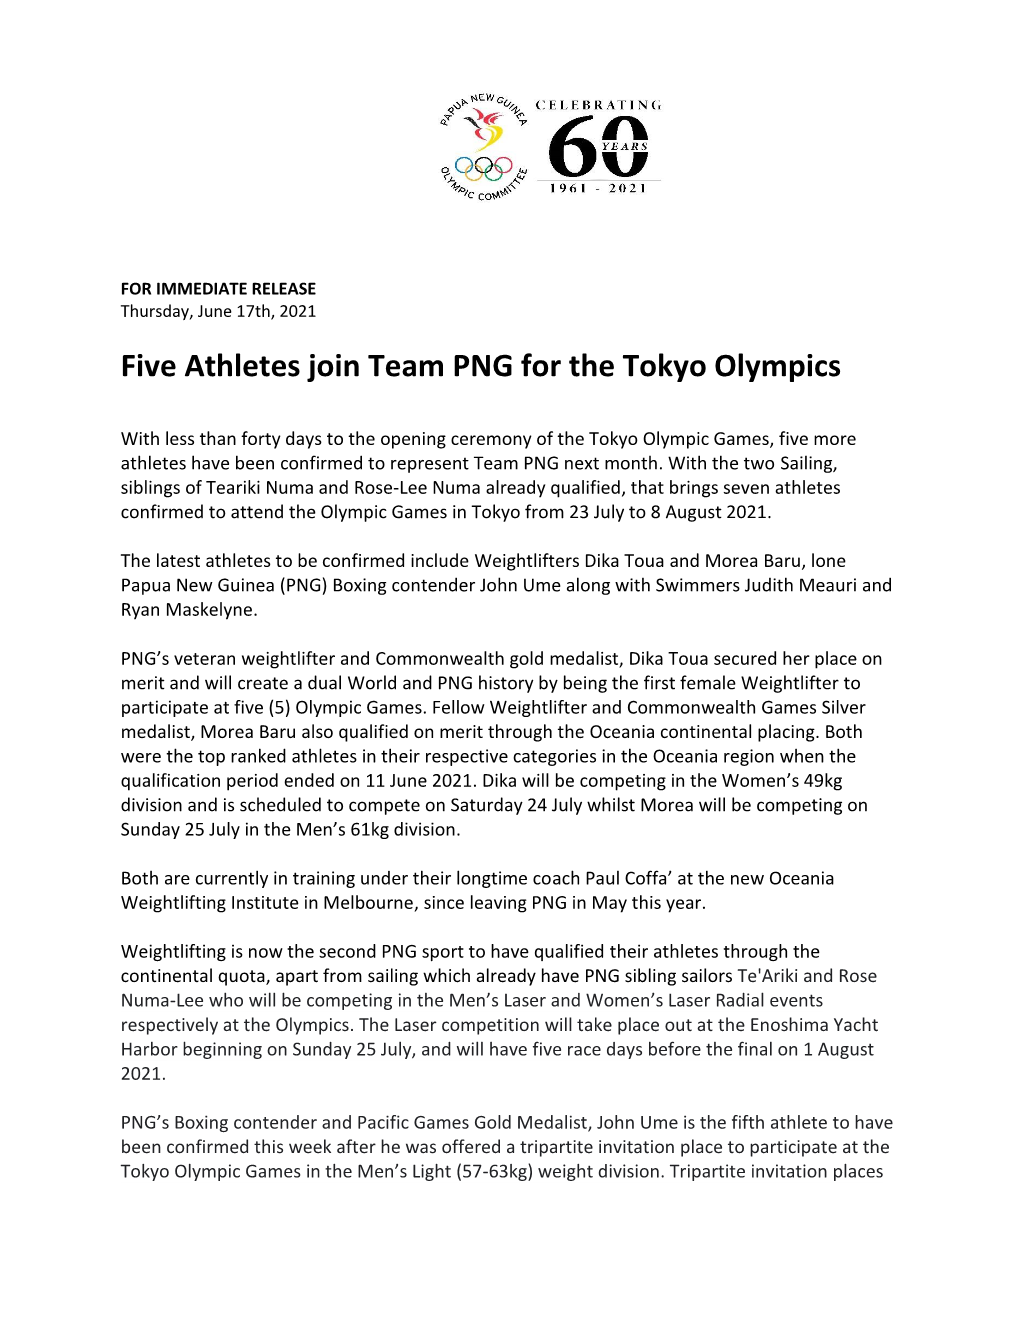 Five Athletes Confirmed to Join Team PNG to the Tokyo Olympics